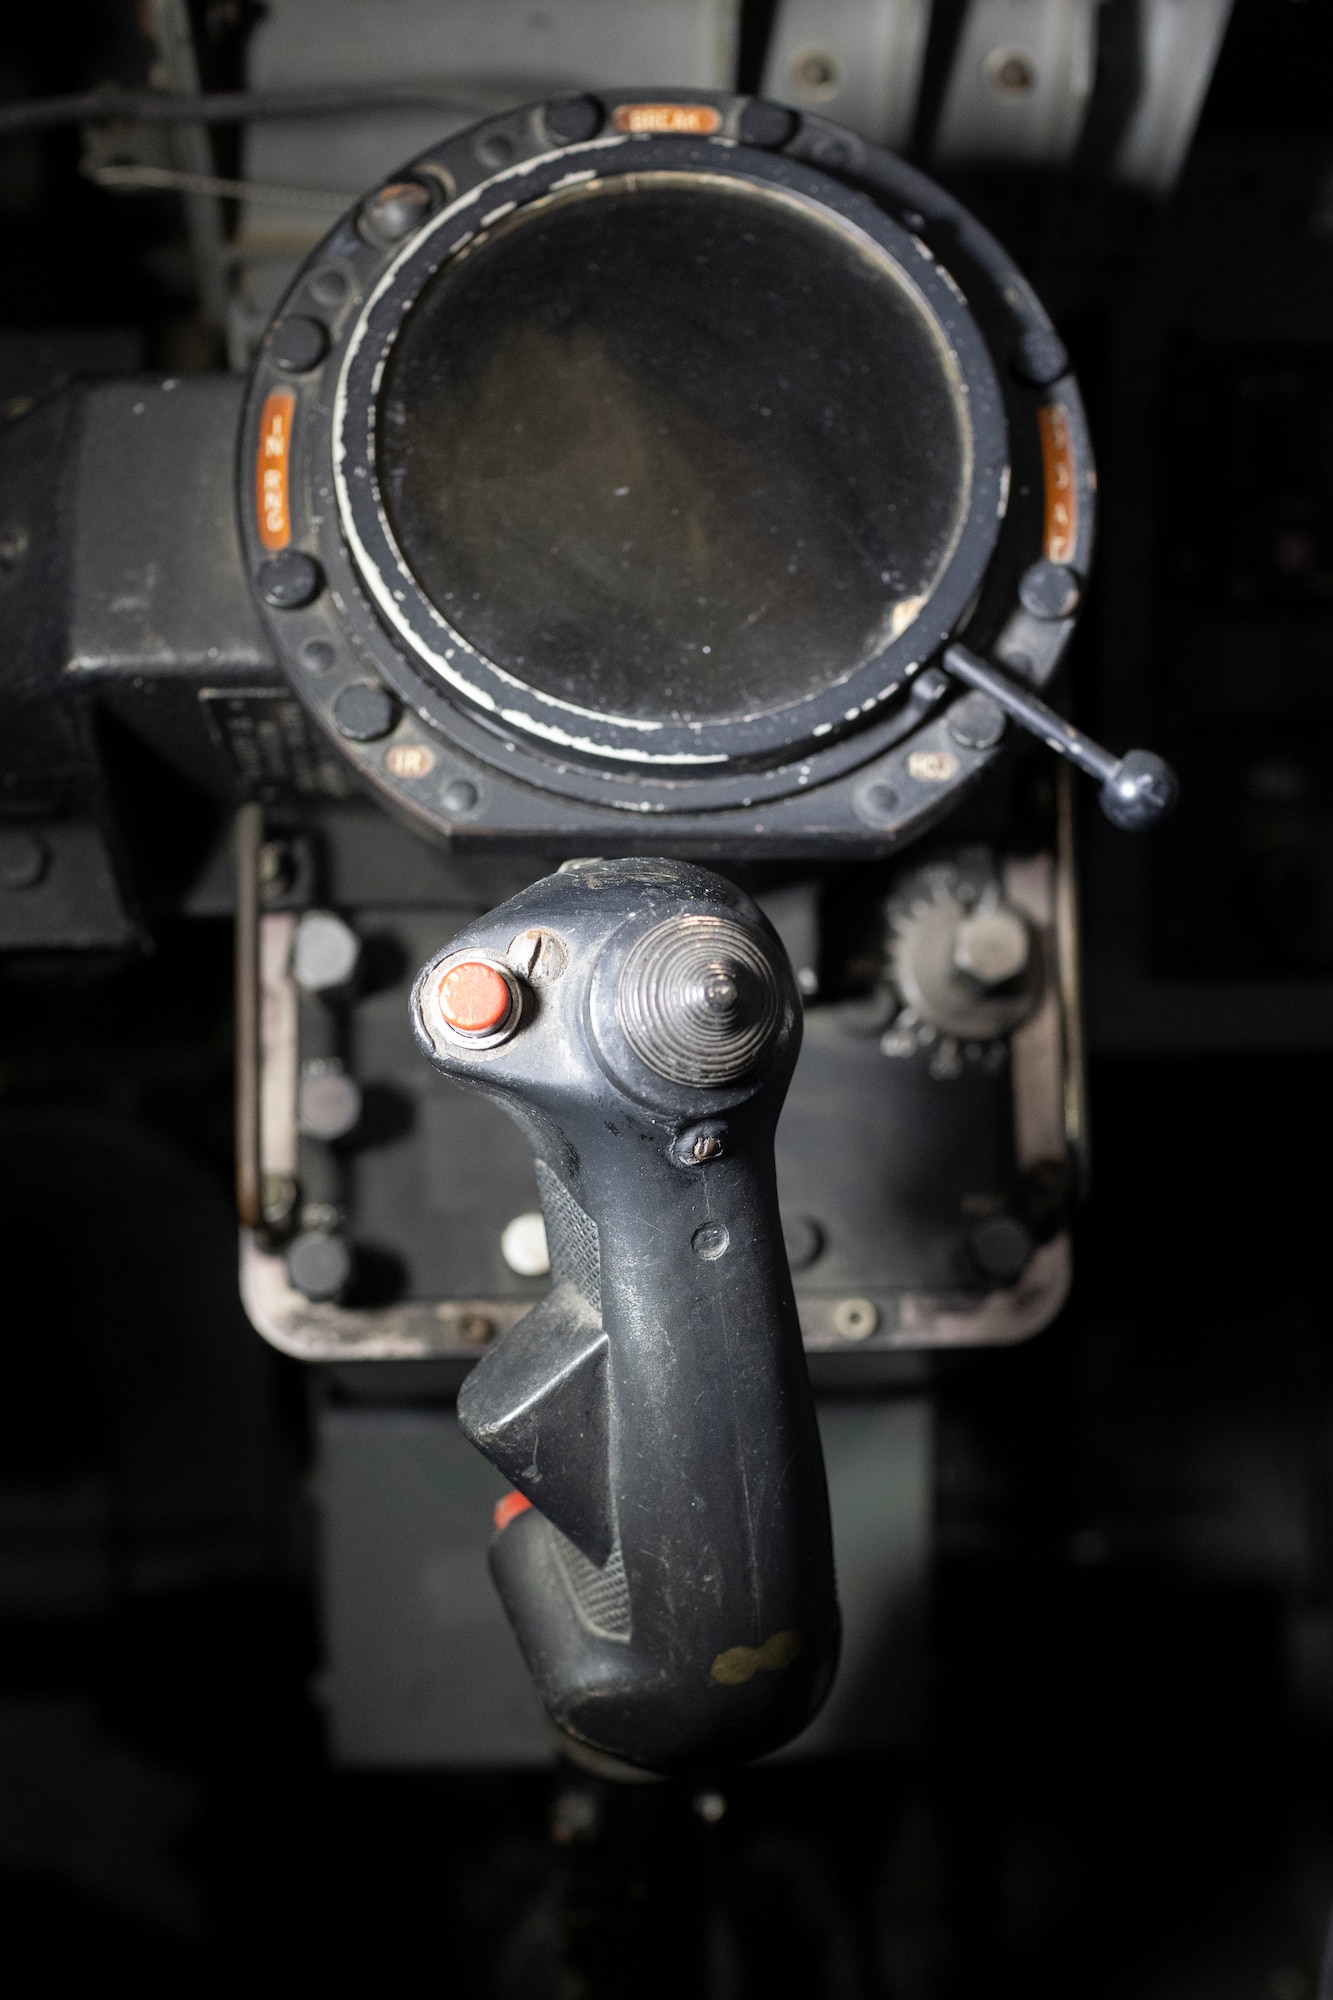 Weapon systems Officer's cockpit view of the McDonnel Douglas F-4C Phantom II.